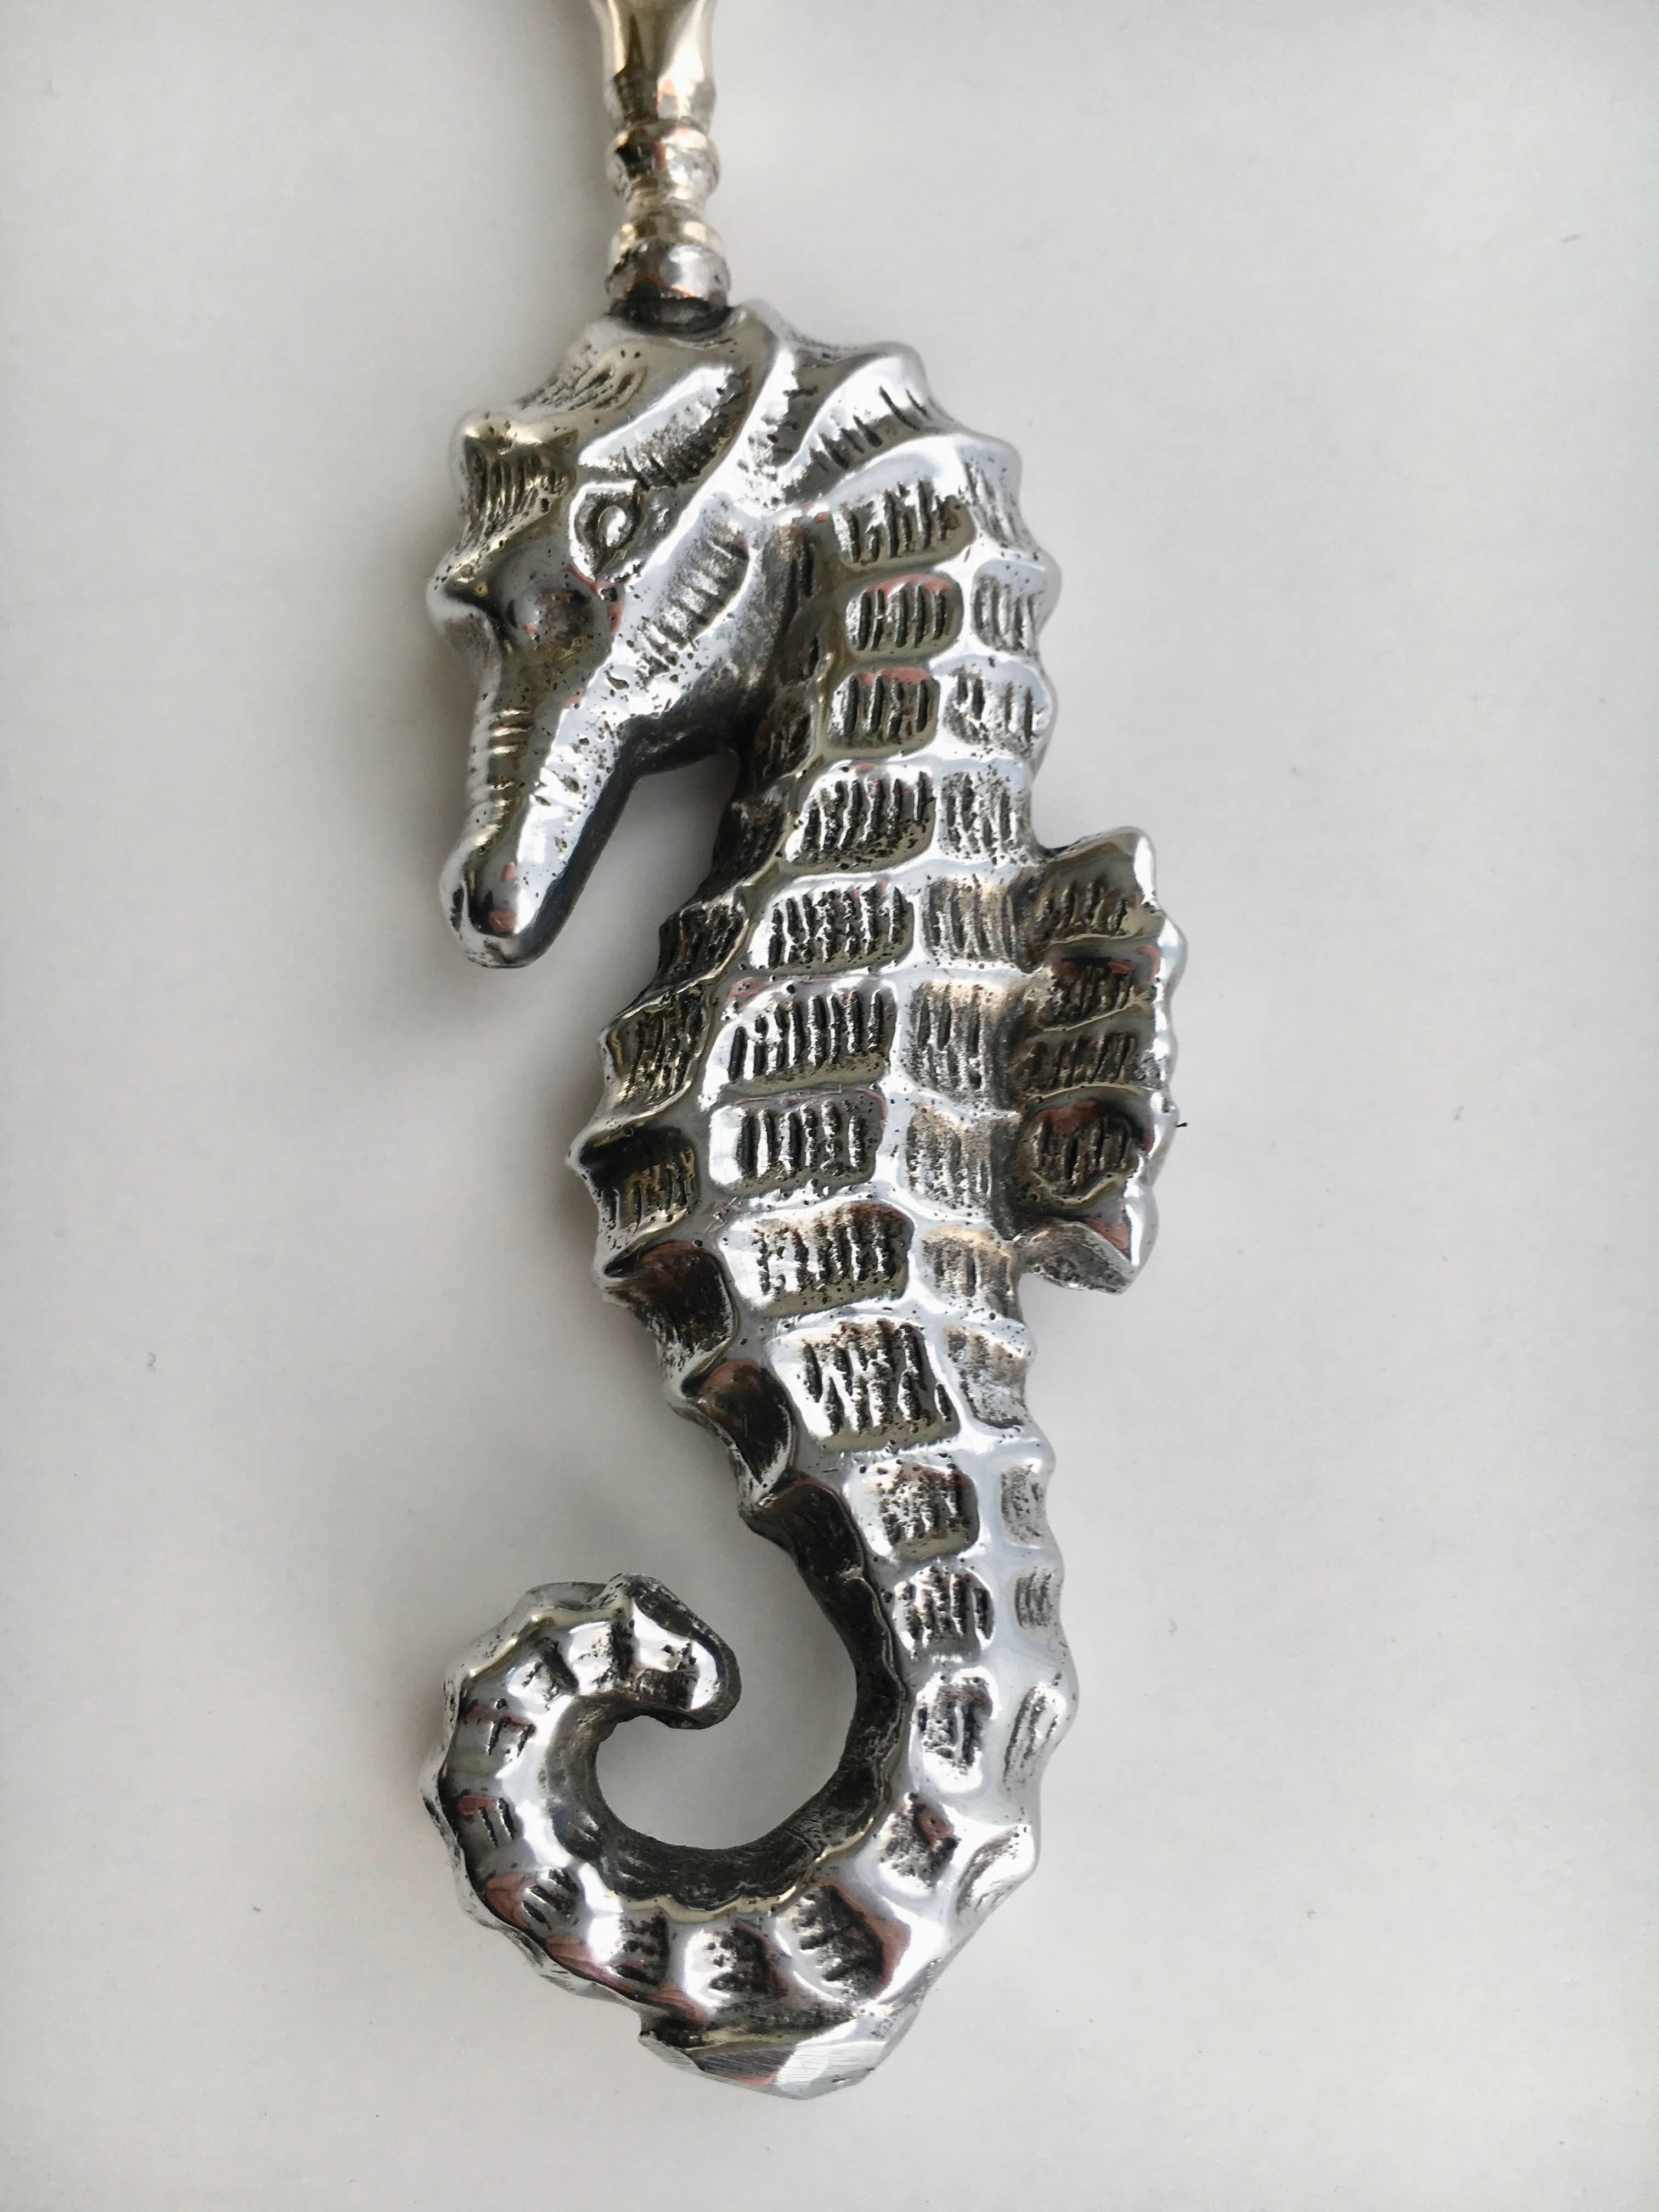 Silver plate seahorse letter opener - once a gift from Miami Beach, we have completely refinished this piece in silver plate - a lovely addition to any desk by the water.